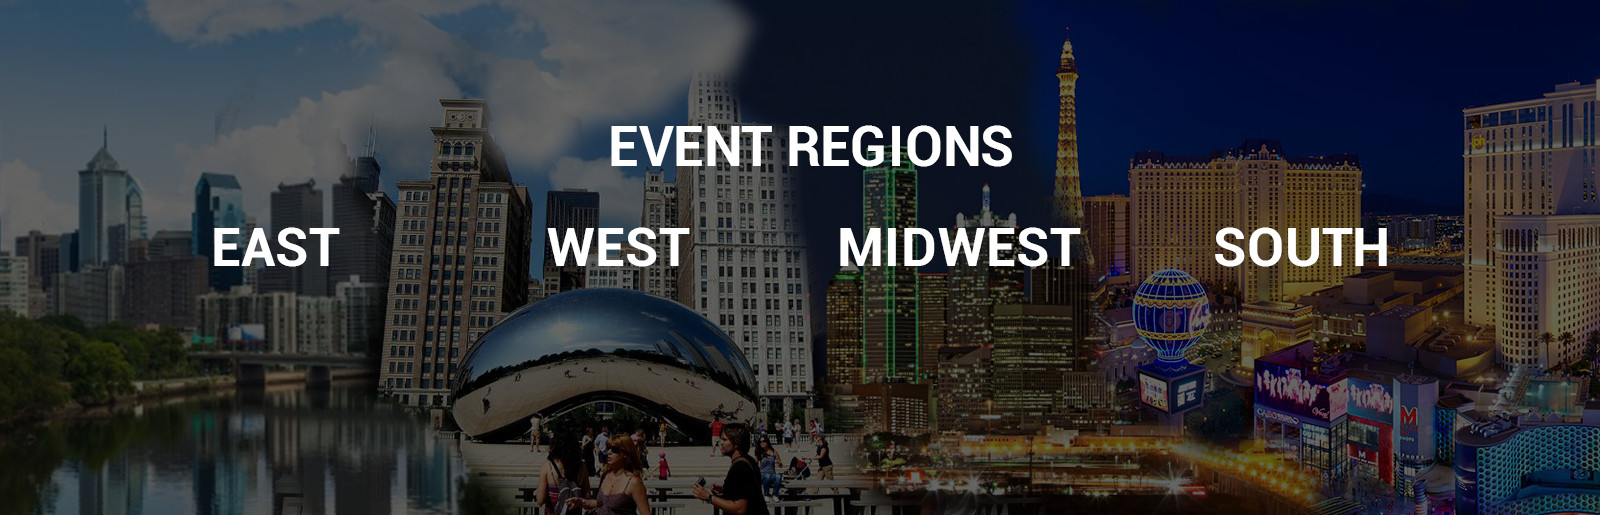 Events Regions East West Midwest South